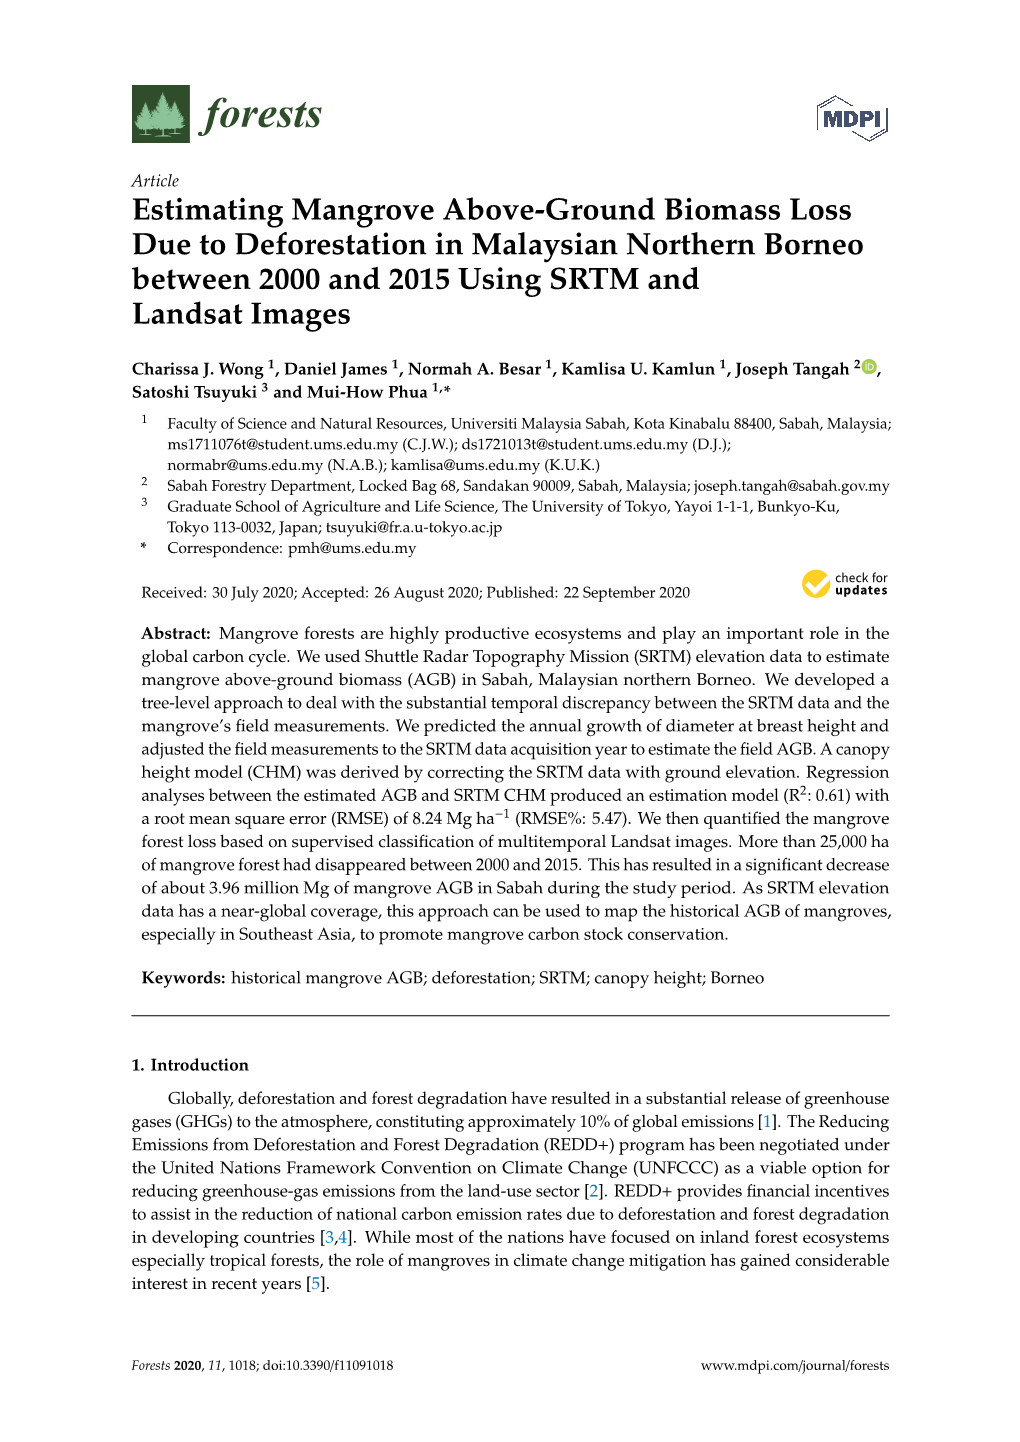 Estimating Mangrove Above-Ground Biomass Loss Due to Deforestation in Malaysian Northern Borneo Between 2000 and 2015 Using SRTM and Landsat Images